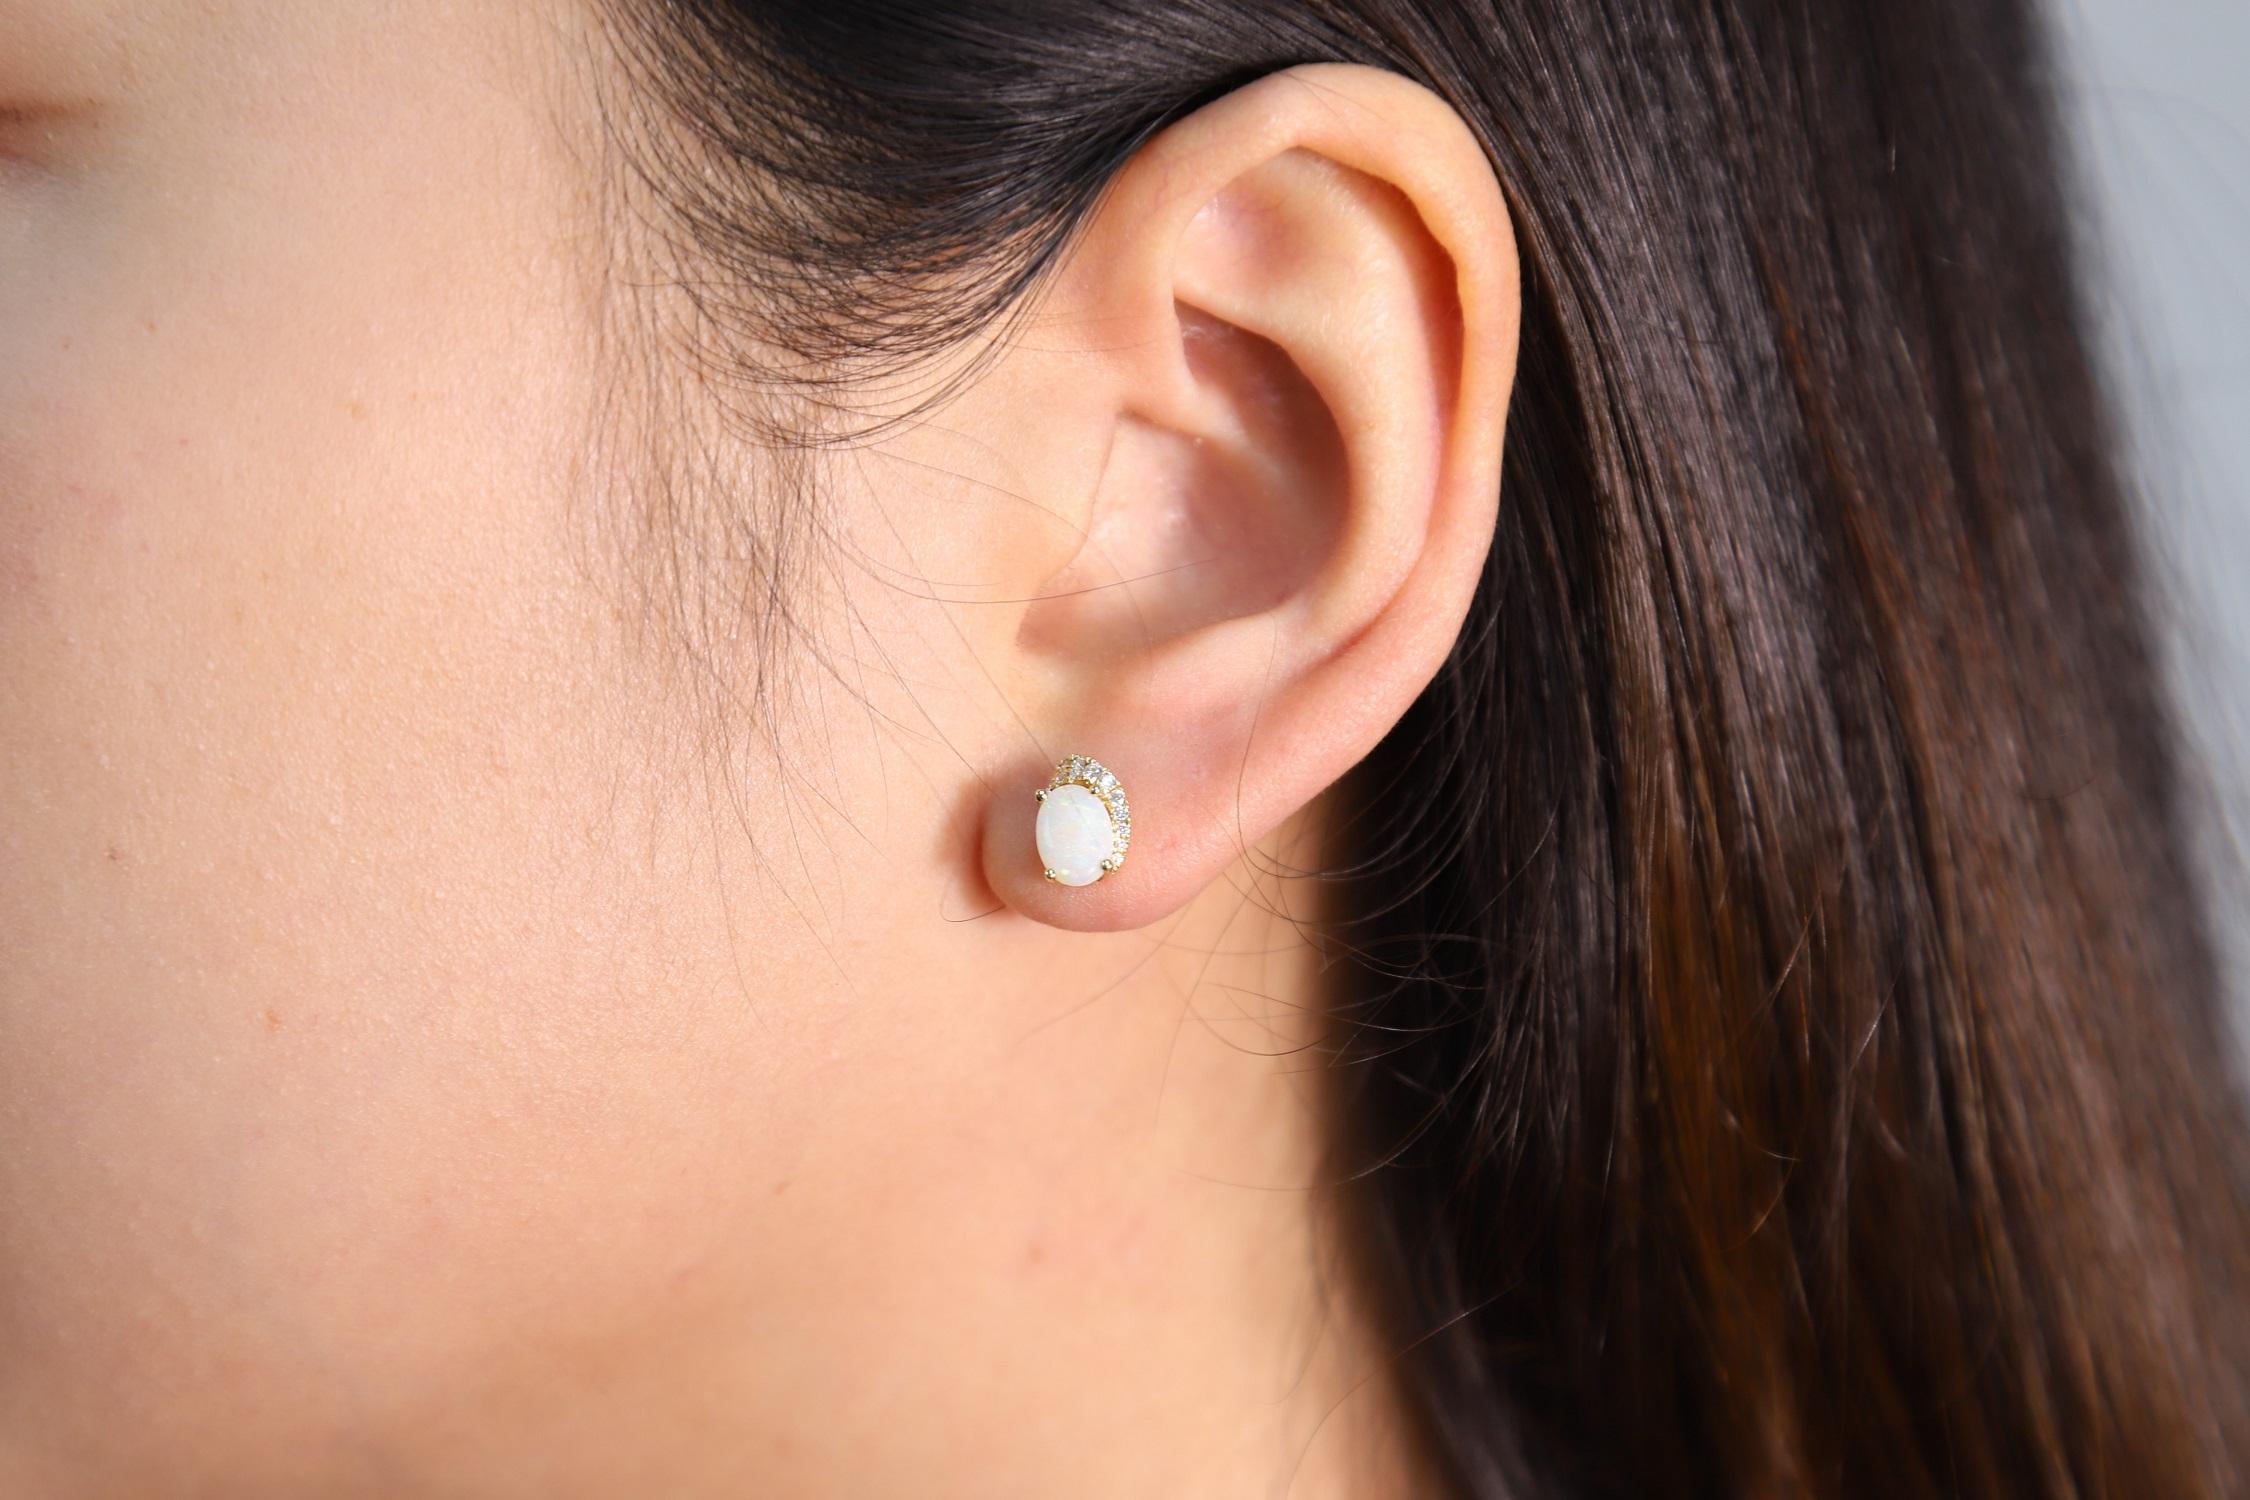 Decorate yourself in elegance with this Earring is crafted from 10K Yellow Gold by Gin & Grace Earring. The jewelry boasts 5X7 Oval-Cut cabochon setting white color Natural Opal (2 pcs) 1.32 Carat and Round-Cut prong setting Diamond (24 pcs) 0.11